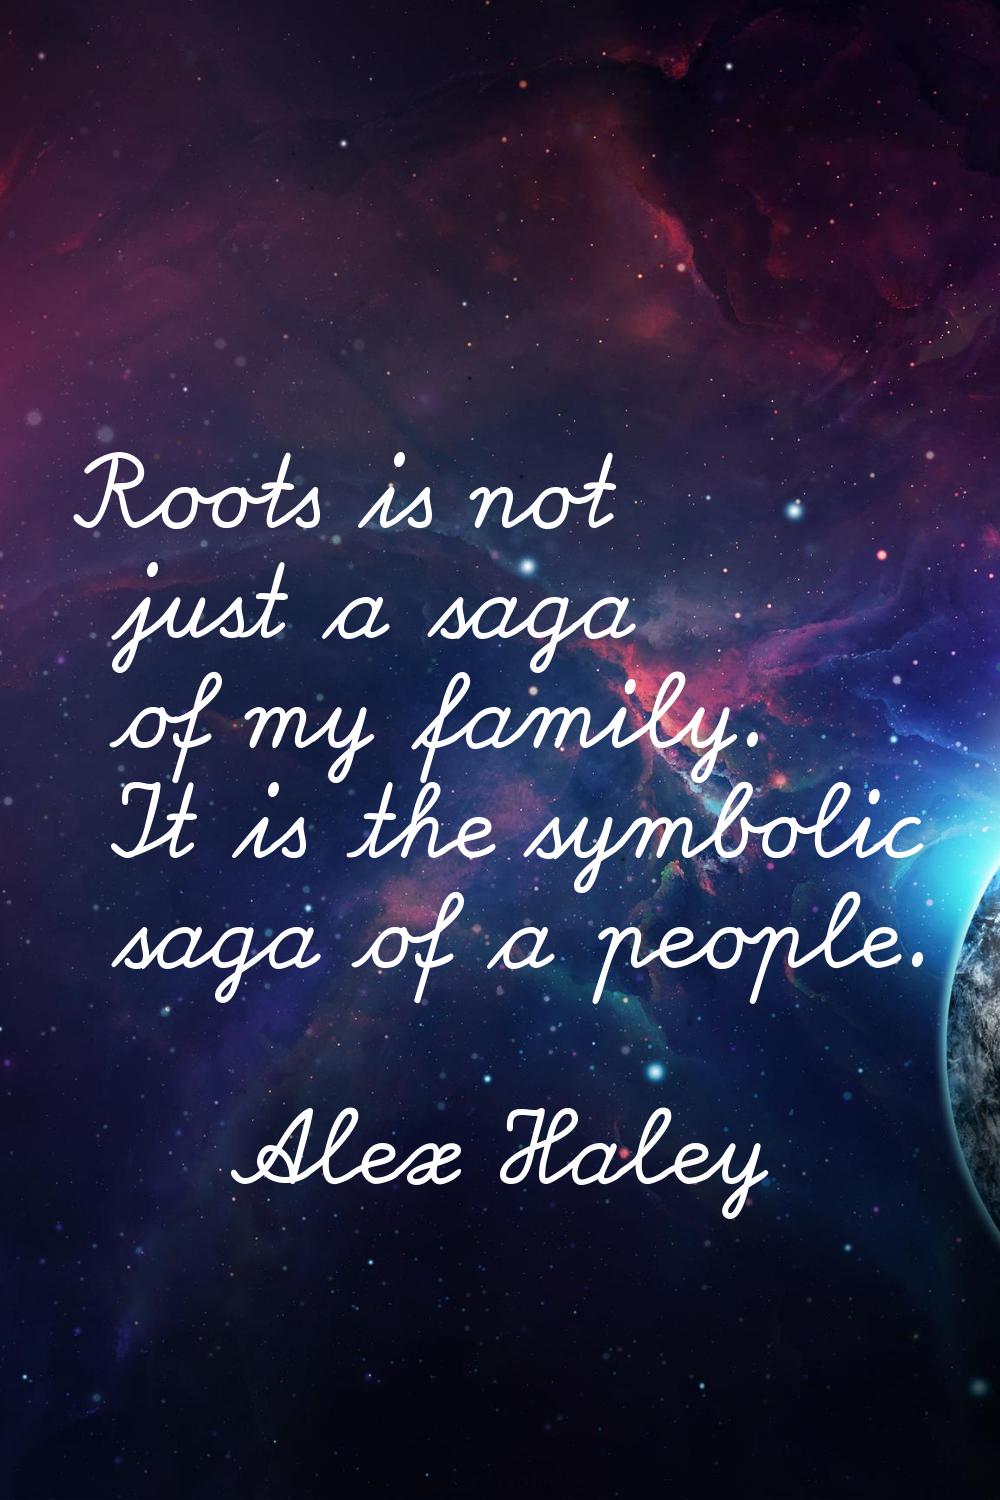 Roots is not just a saga of my family. It is the symbolic saga of a people.